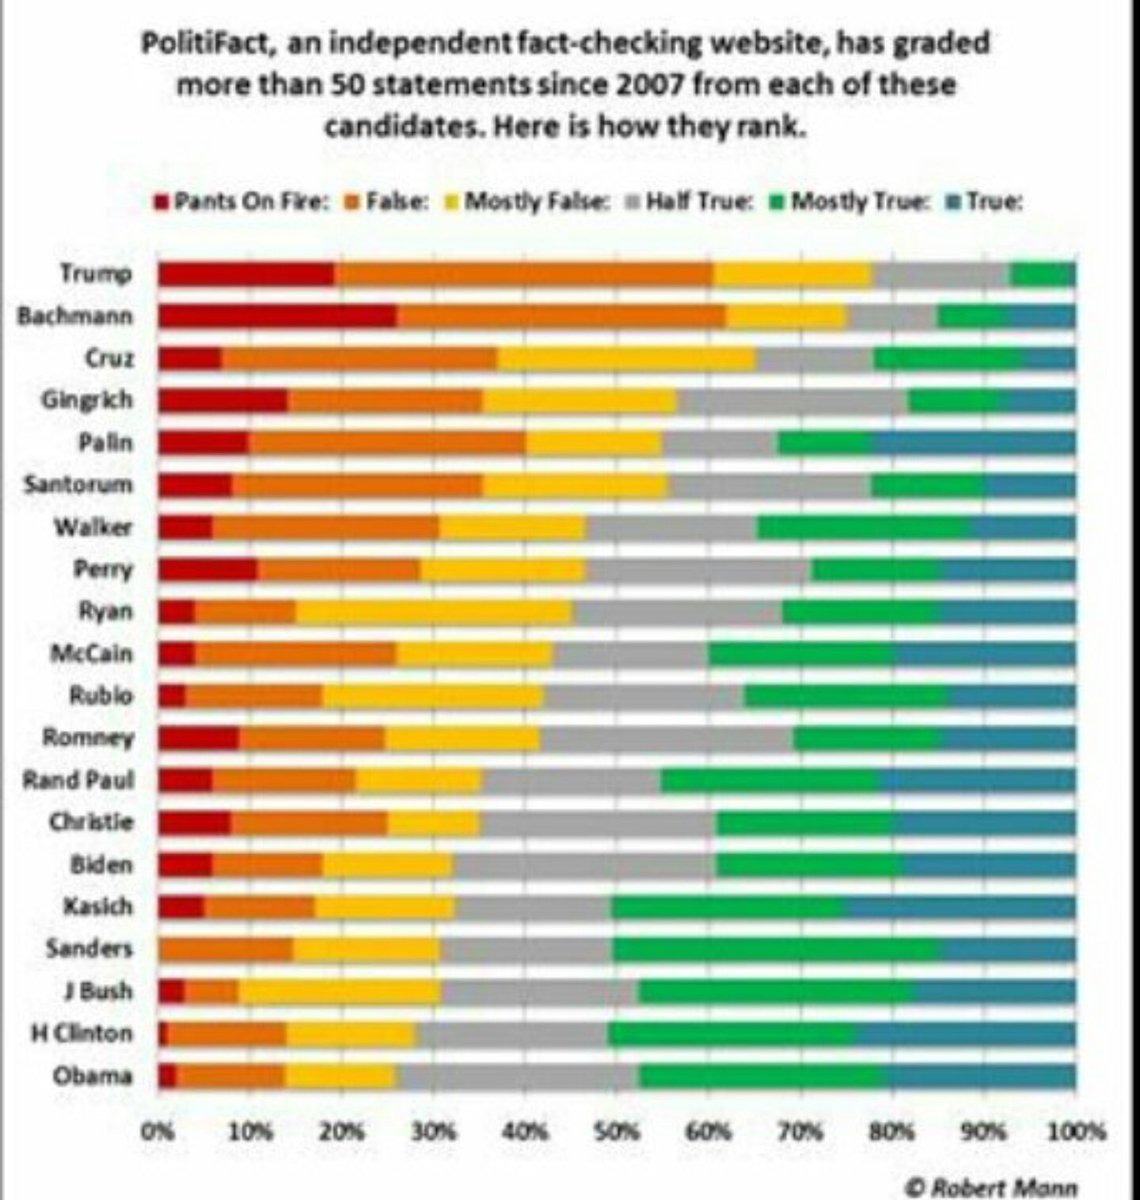  @PolitiFact, an independent fact checking website, created this in 2016. They graded more than 50 statements since 2007 from each one listed.Notice who lies, hint.. It's not the  #Democrats! #Republican  #GOPlies  #TrumpLies  #Trump would be off the chart by now,  #MAGA bigly